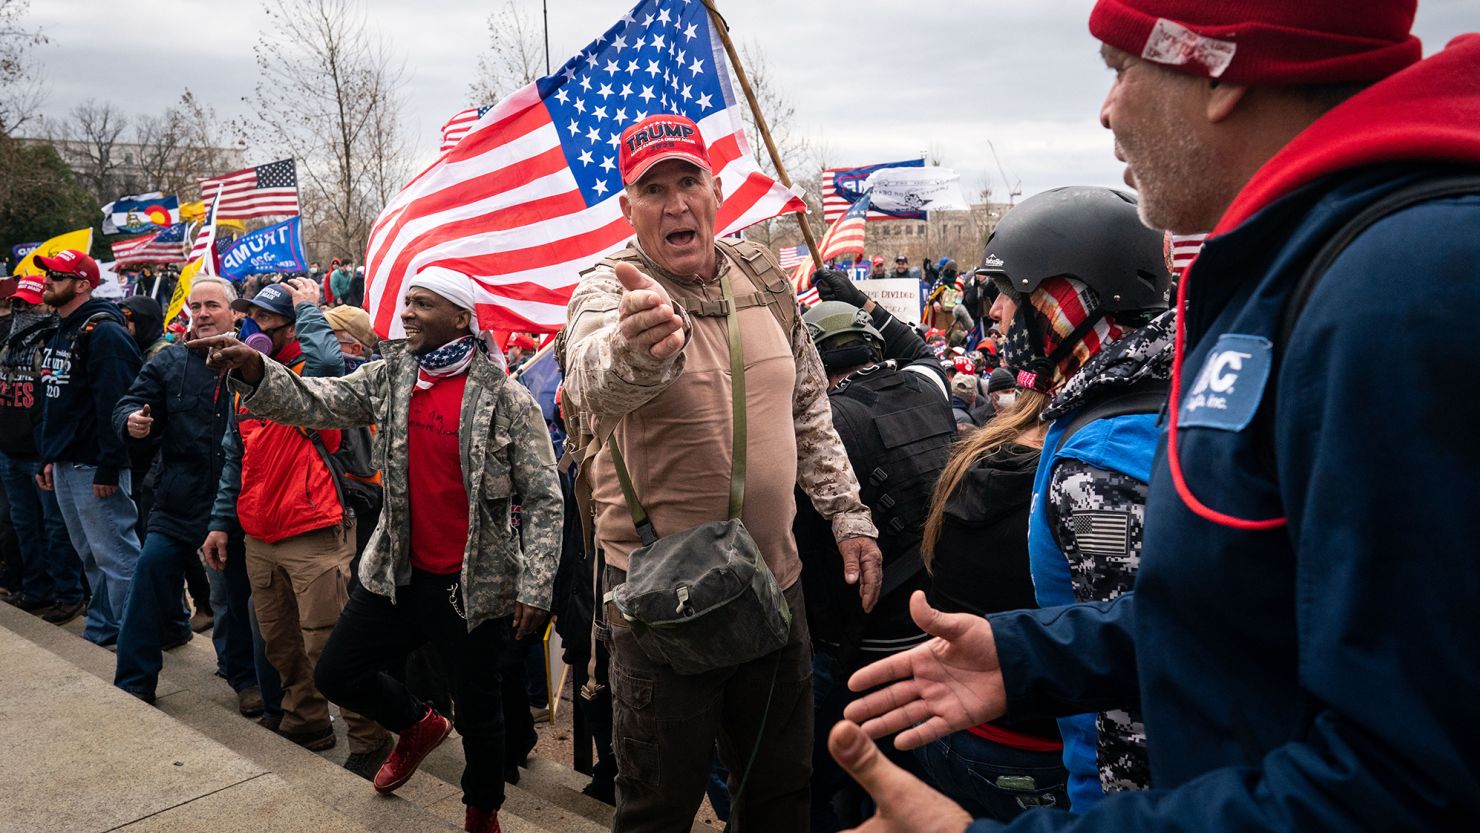 Ray Epps, in the red Trump hat, center, gestures to others as people gather on the West Front of the U.S. Capitol on Wednesday, Jan. 6, 2021.